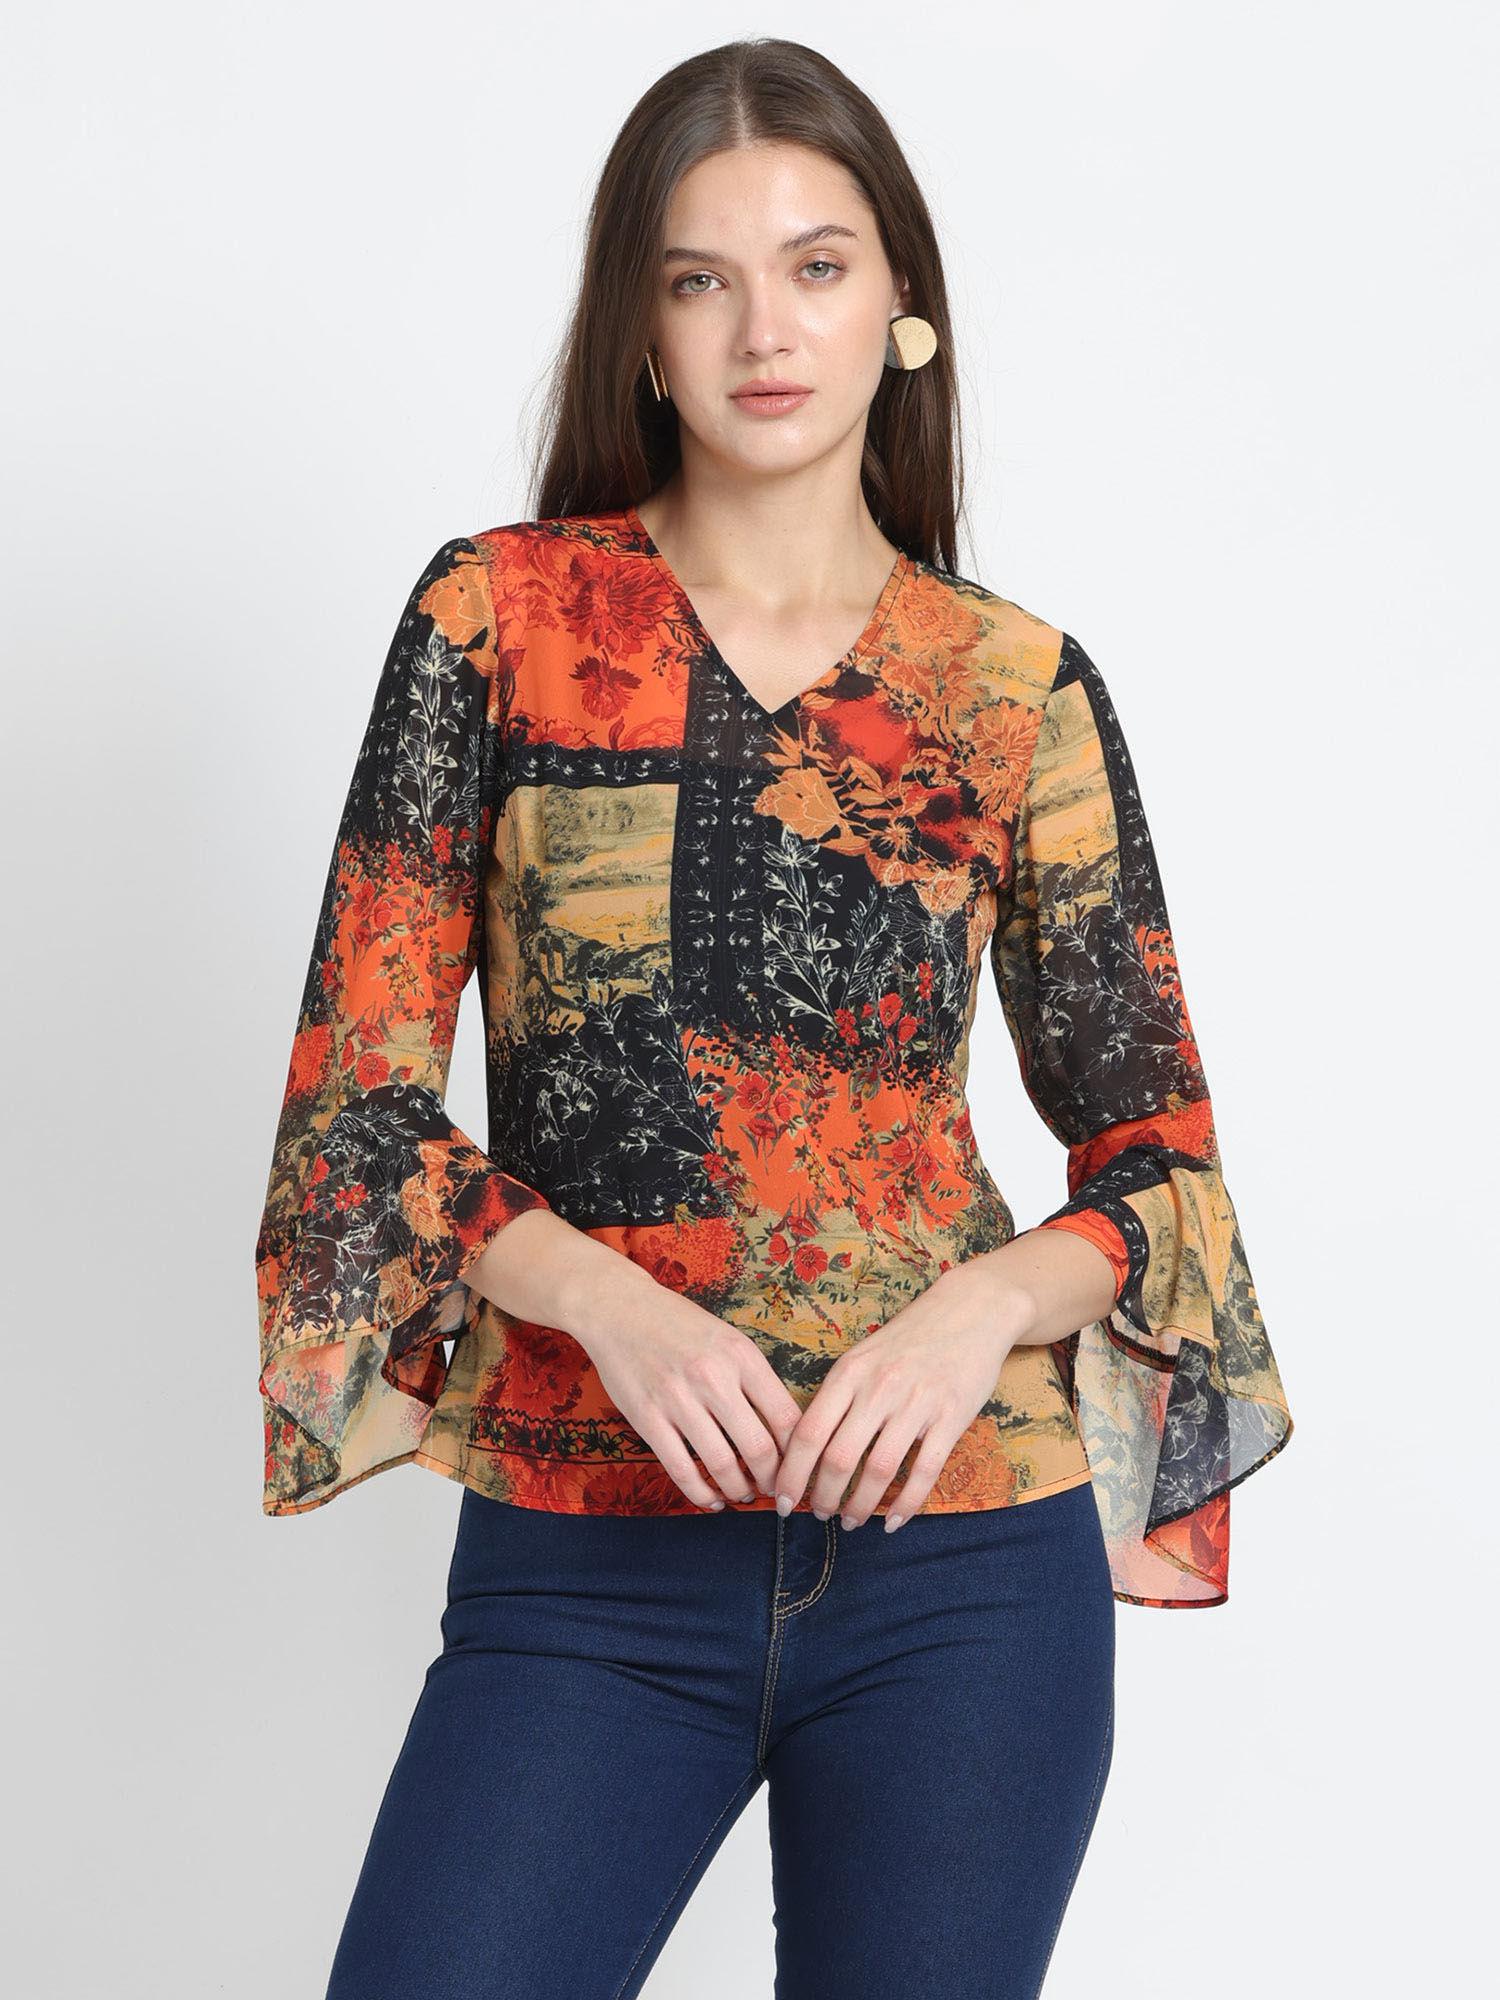 v-neck multi floral print three fourth sleeves casual tops for women